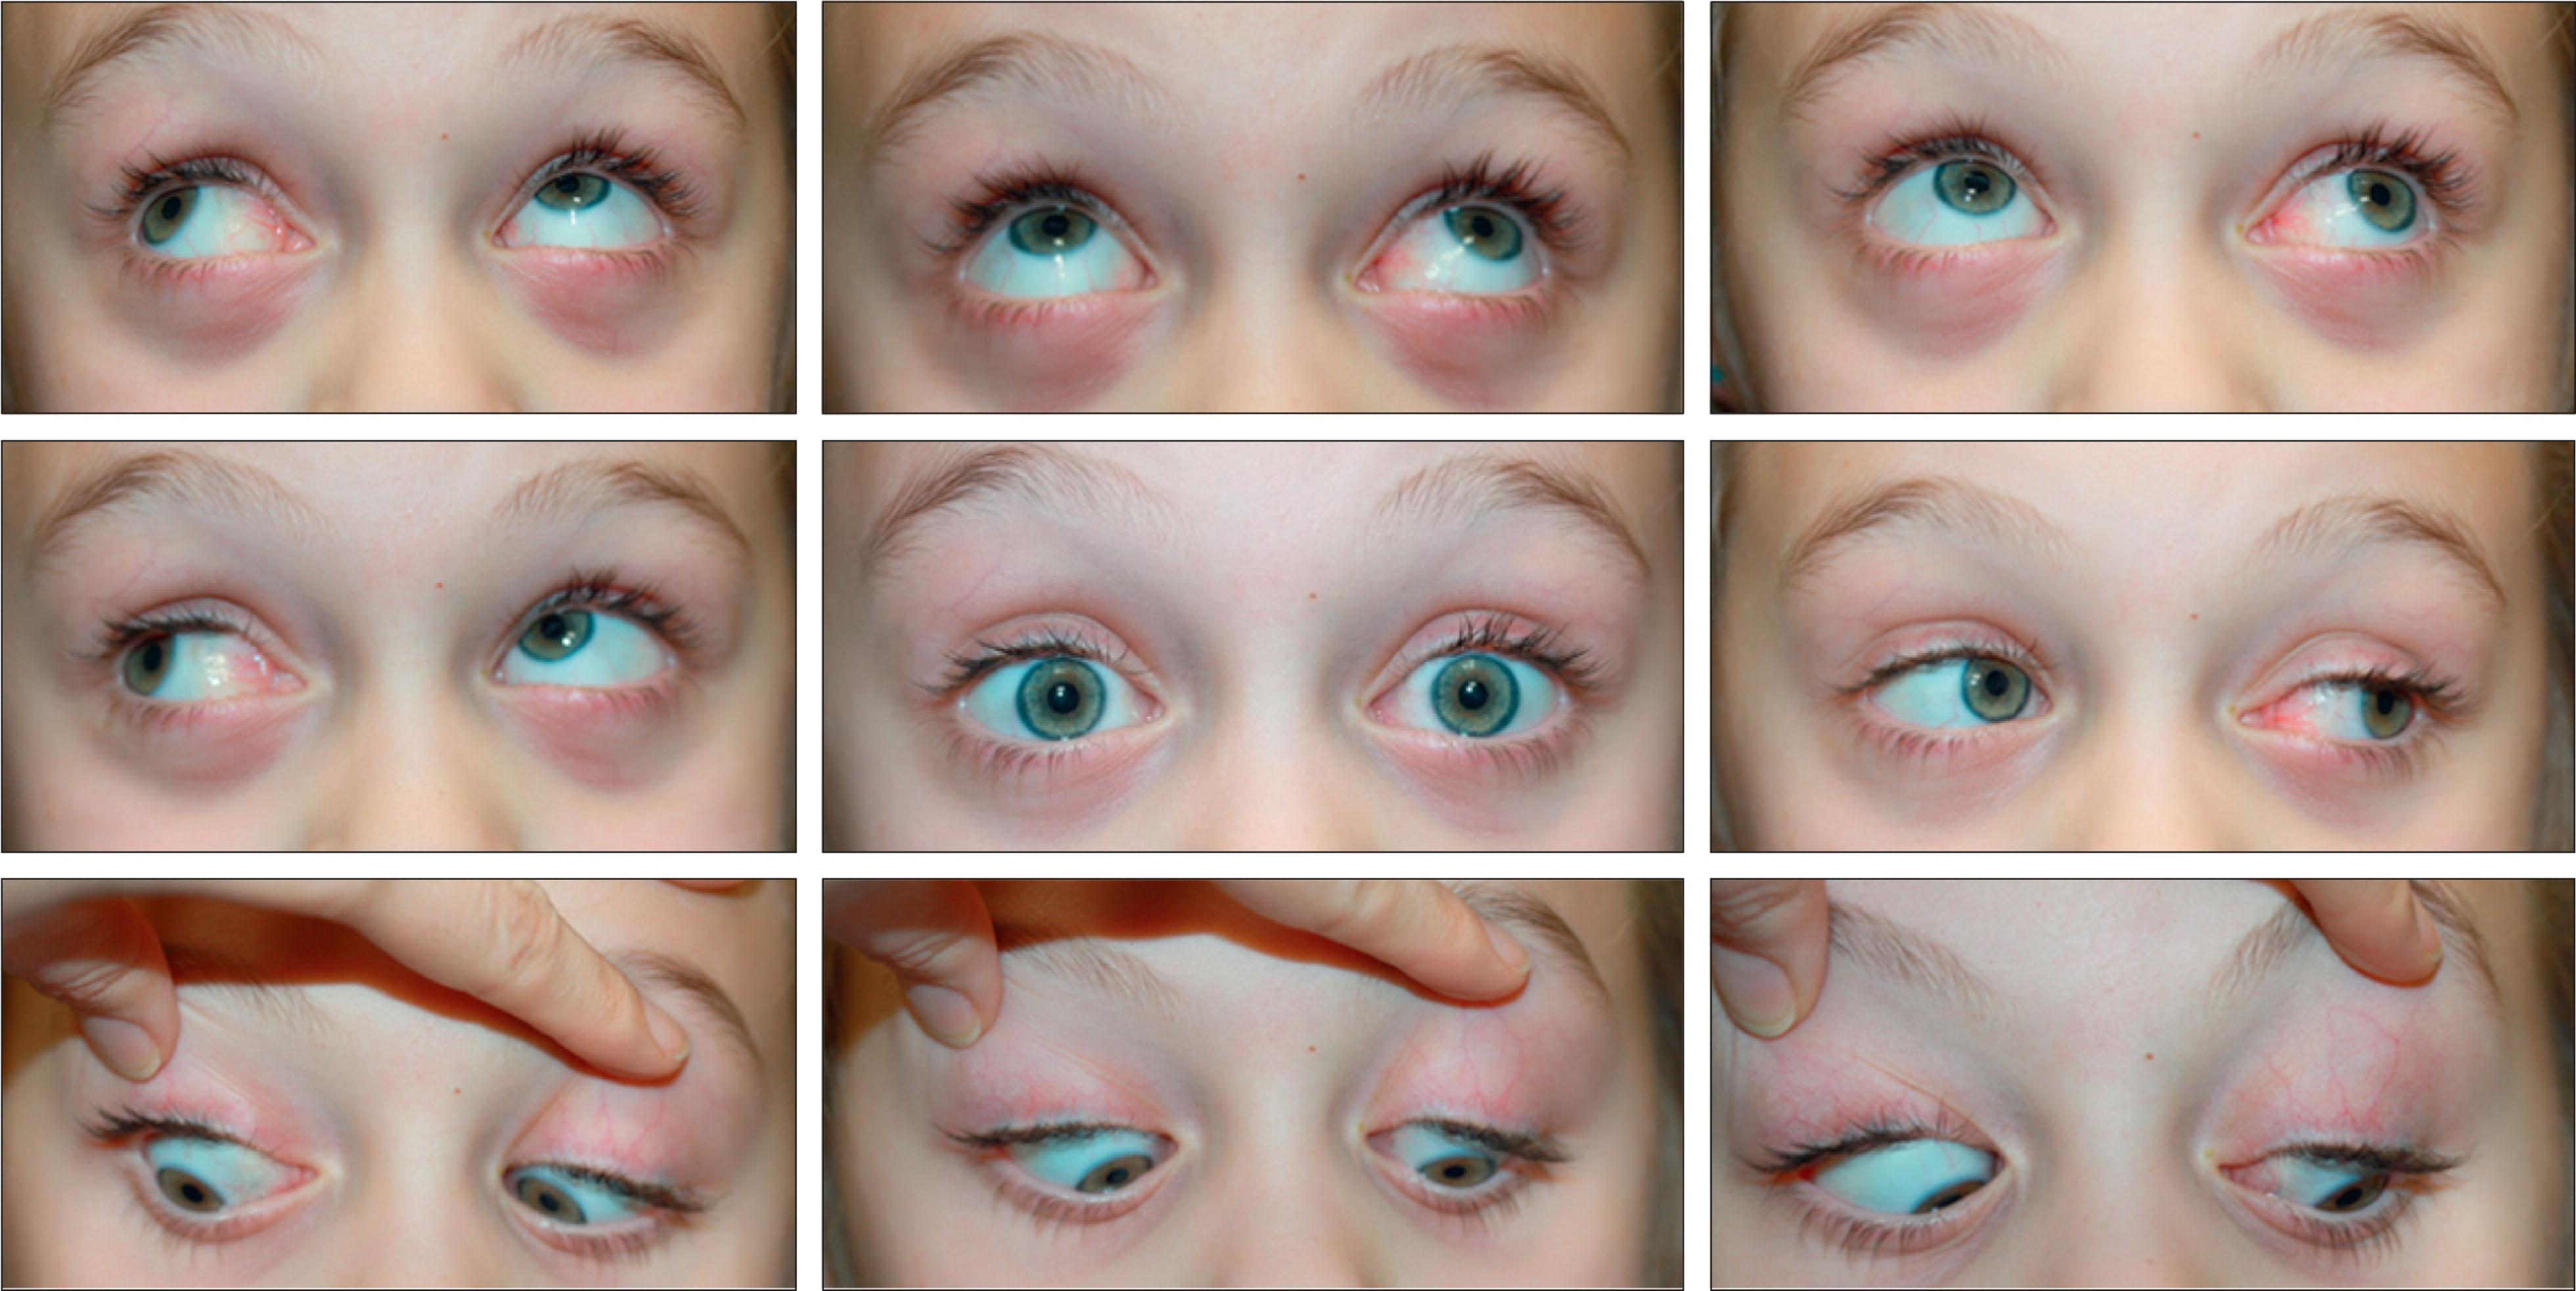 Fig. 11.8.2, Nine-gaze ocular photograph displaying V pattern with inferior oblique overaction and superior oblique underaction in a patient with excyclotorsion.